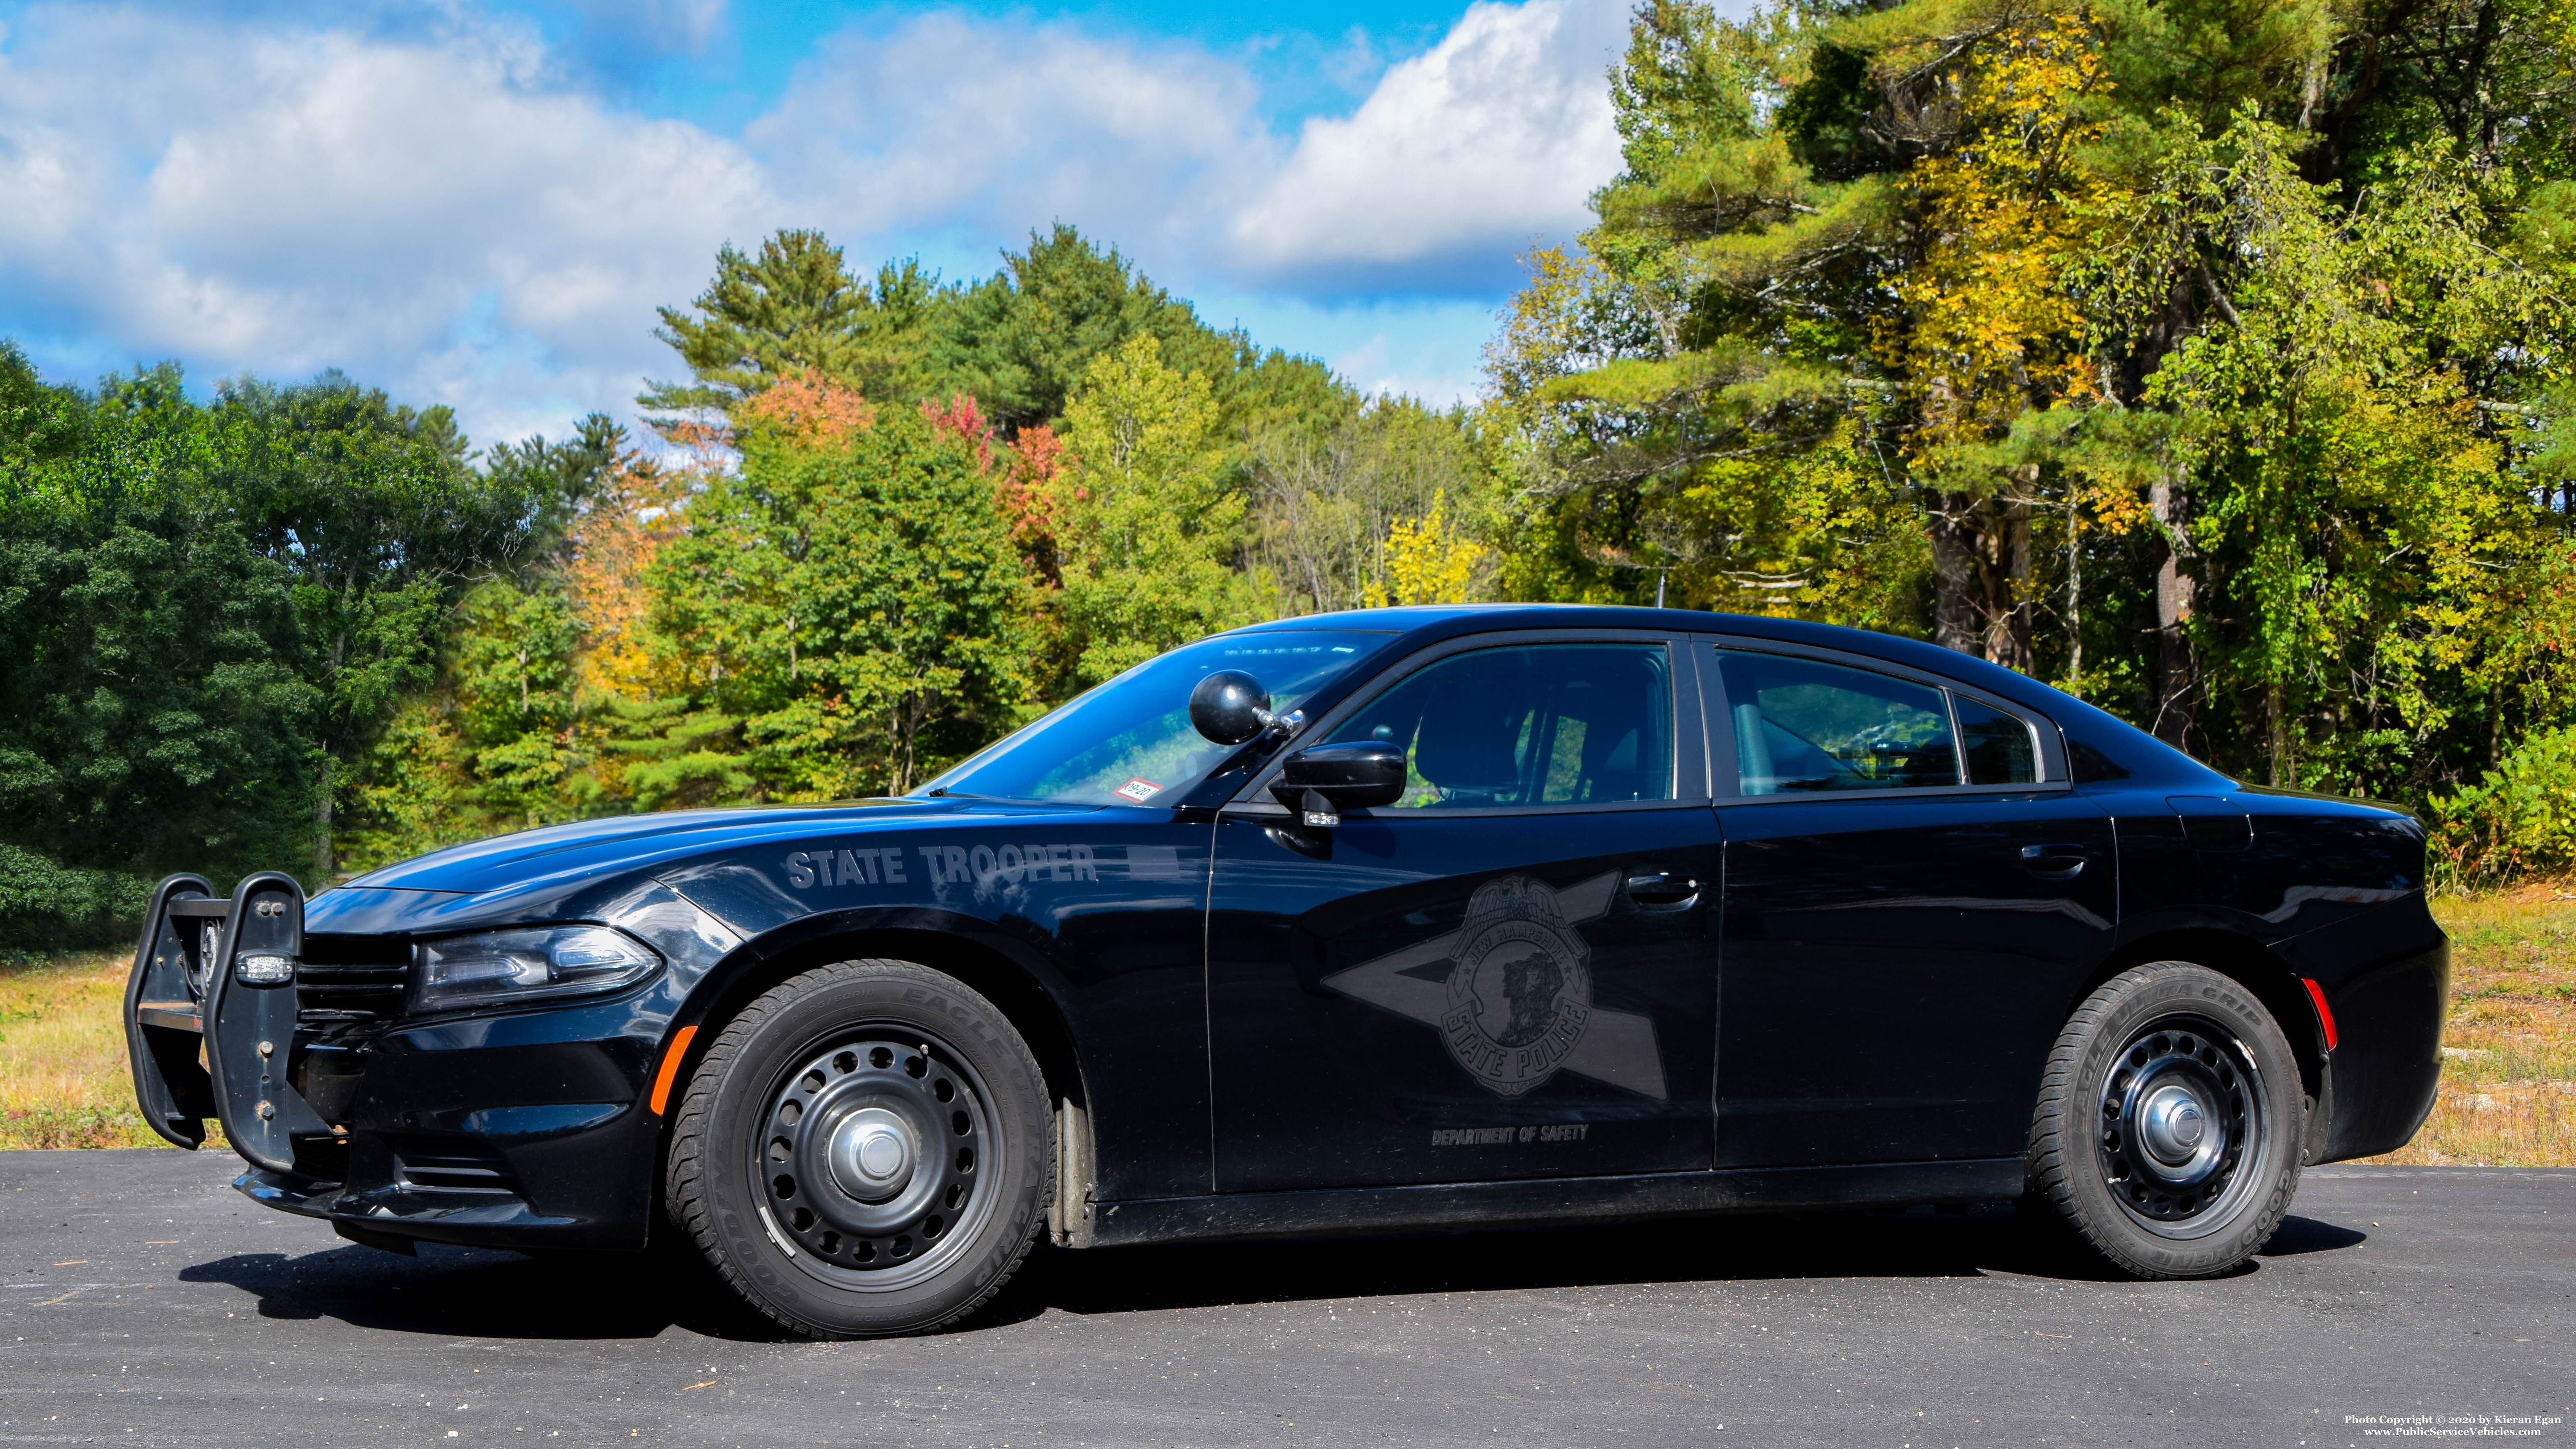 A photo  of New Hampshire State Police
            Cruiser 620, a 2016 Dodge Charger             taken by Kieran Egan